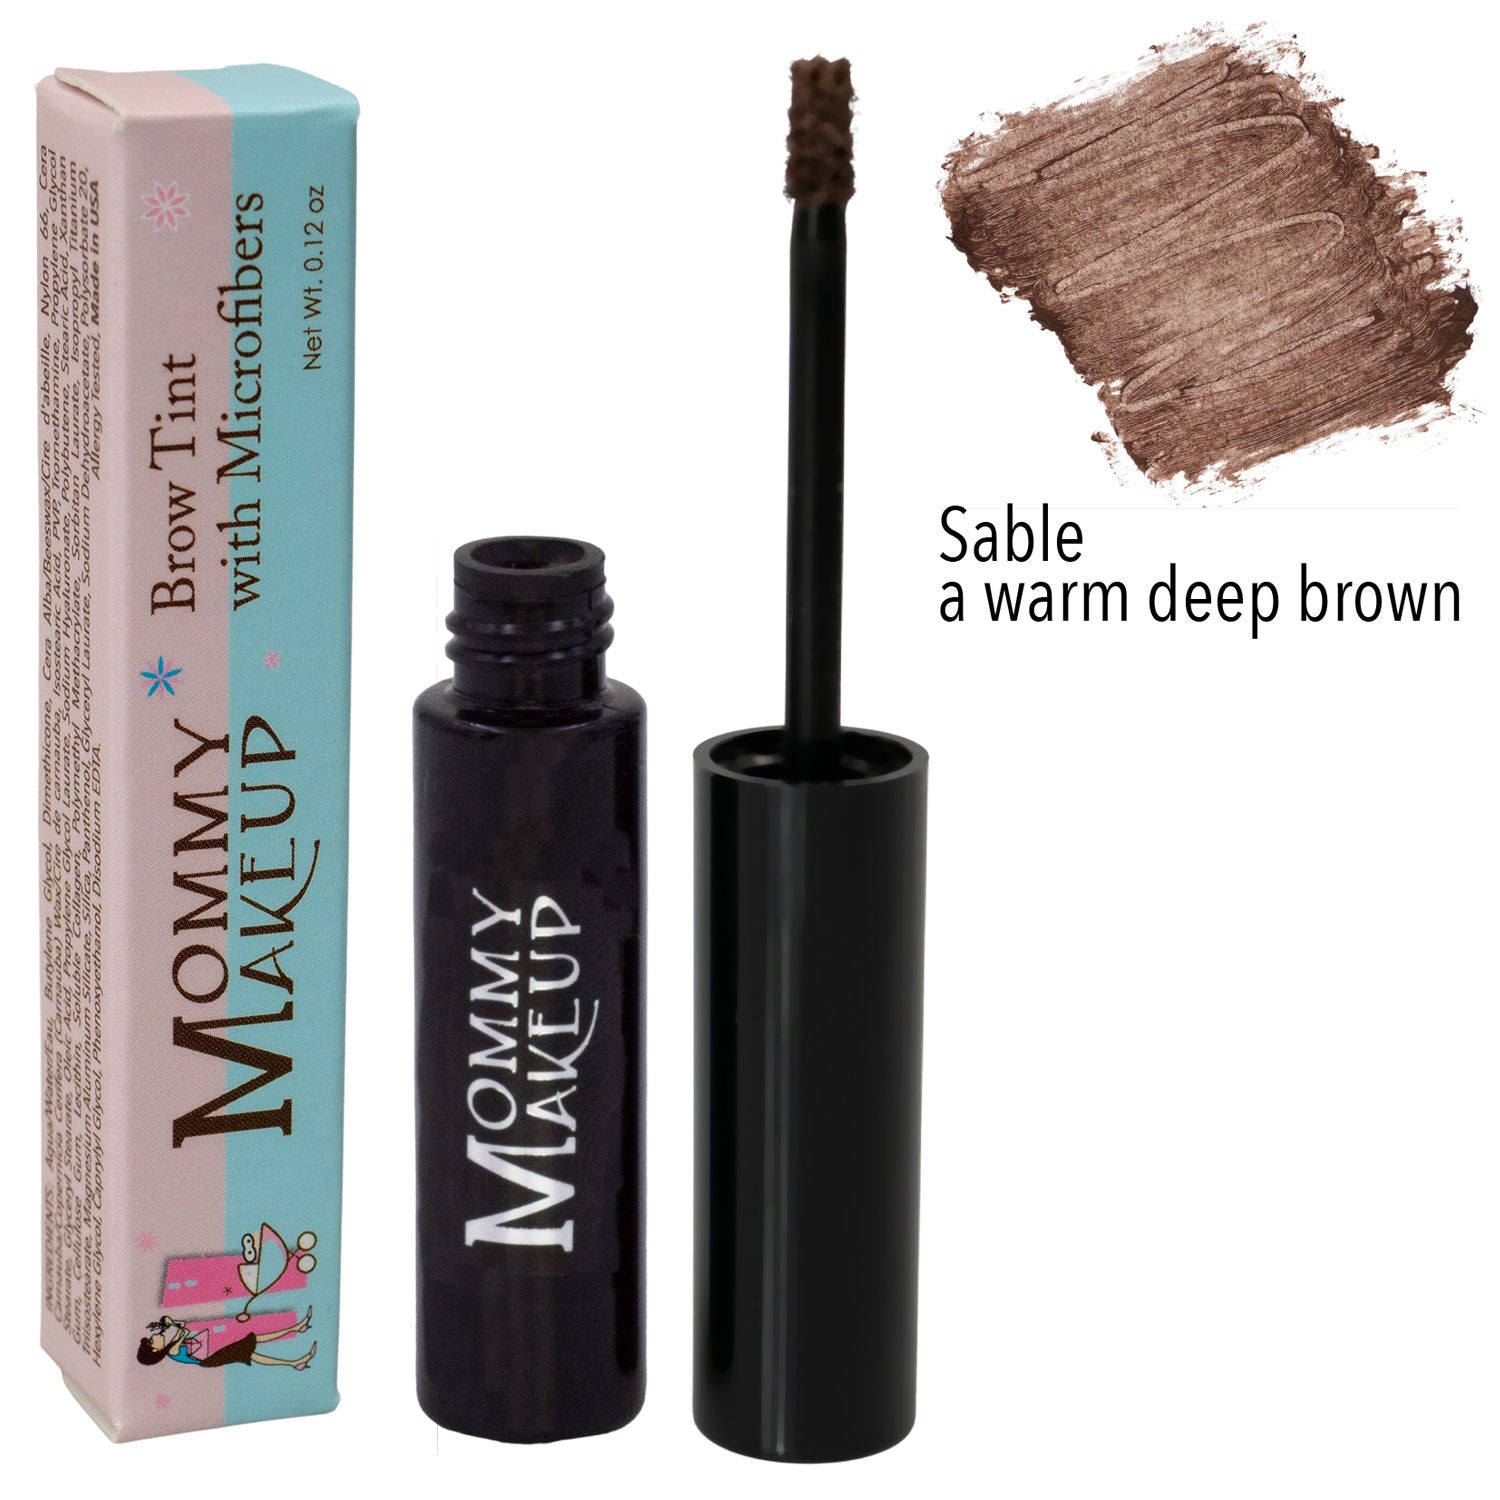 Brow Tint with Microfibers - Sable by Mommy Makeup for a balanced and bright eye! Tinted Eyebrow Gel. Clump-free, paraben-free, talc free, allergy tested, PETA certified cruelty free.